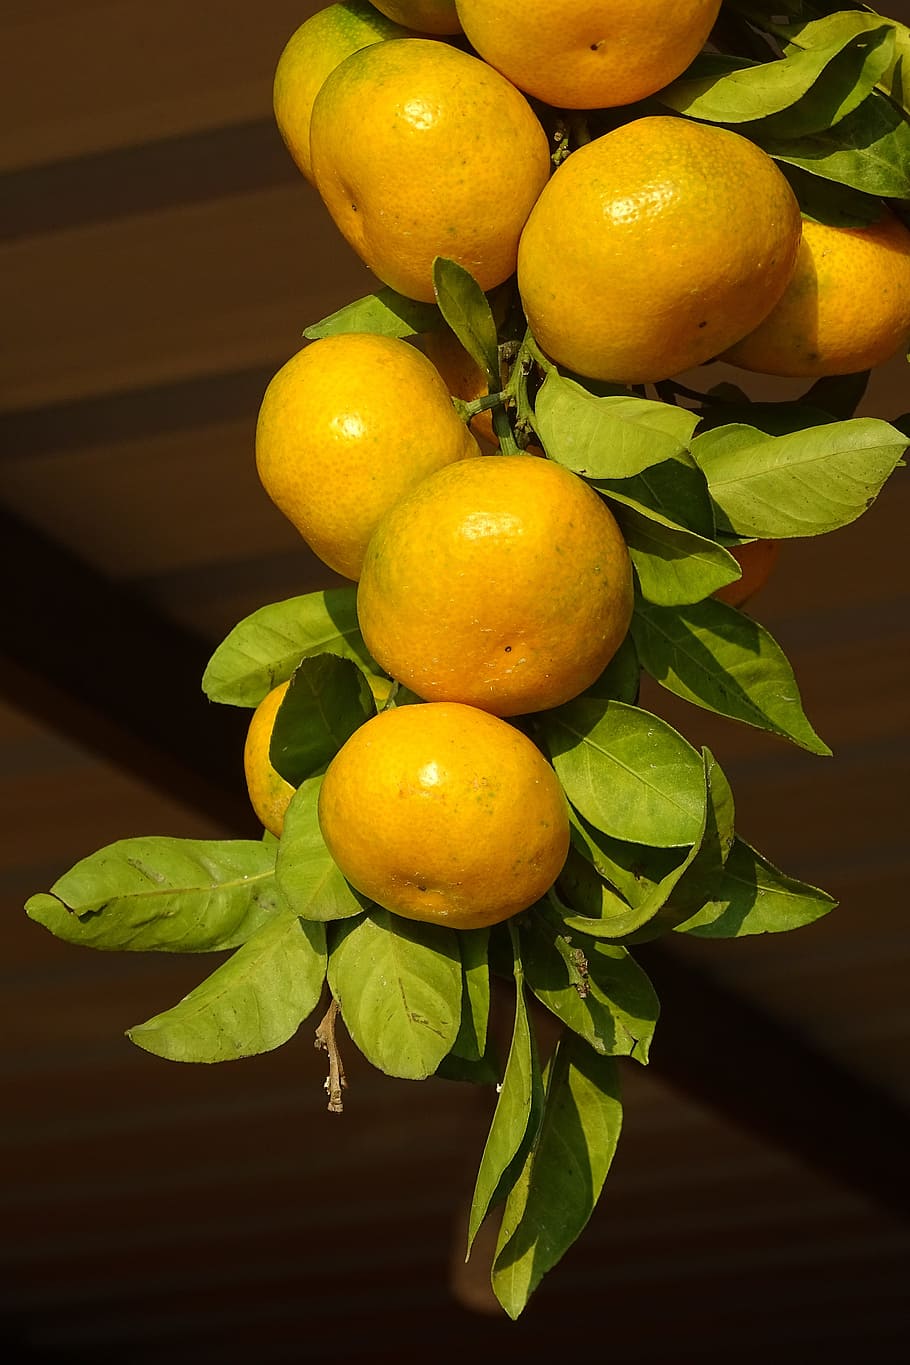 clementines, citrus fruits, branch, tangerines, market, yellow, eat, food, healthy eating, food and drink